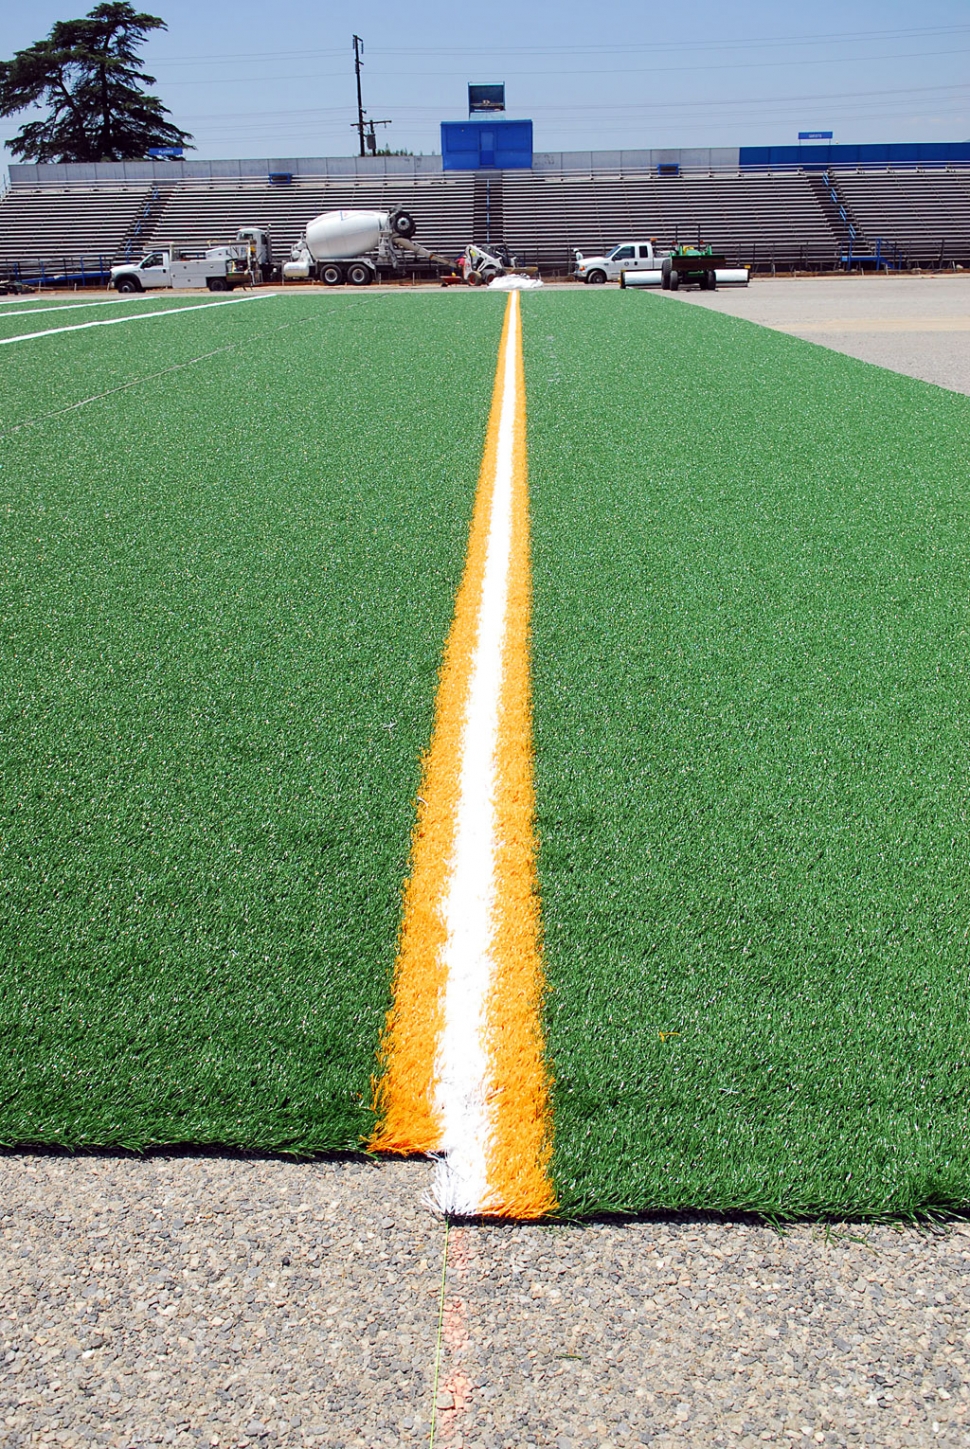 The final phase of FHS improvements are underway with artificial turf being installed. Installation of the all-weather track will be complete by August 2008.